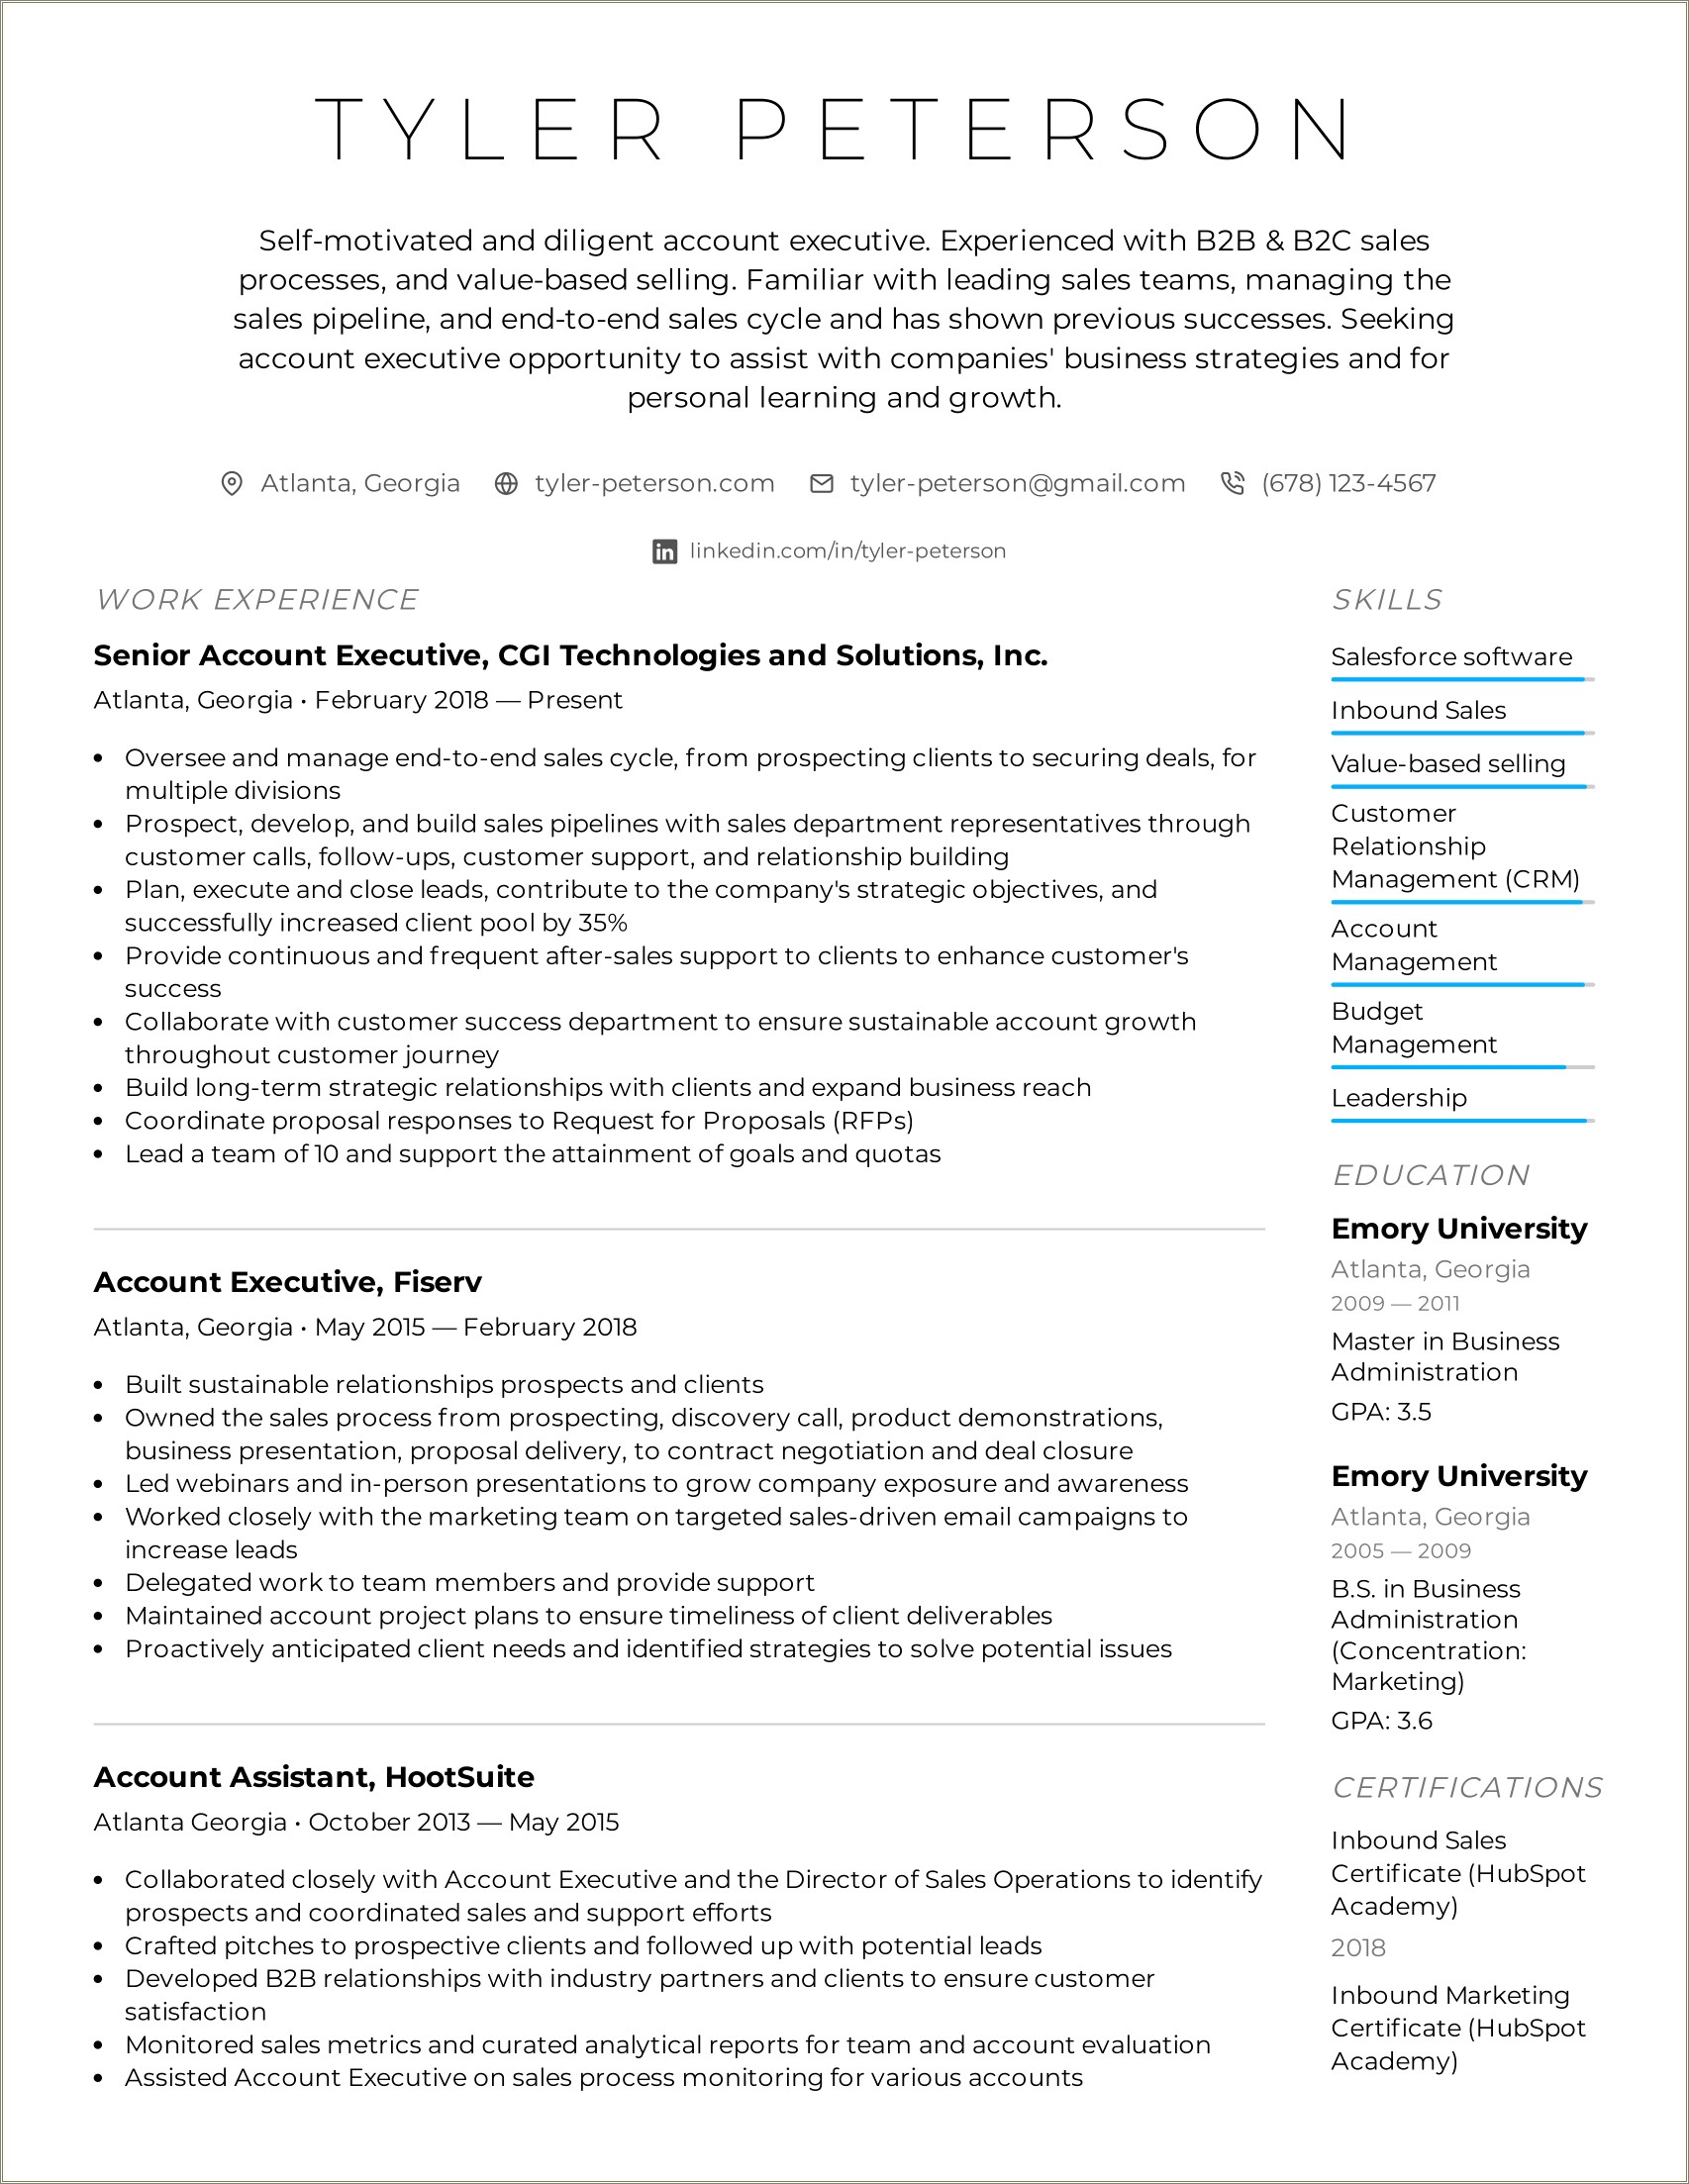 Examples Of Computer Skills On Resumes